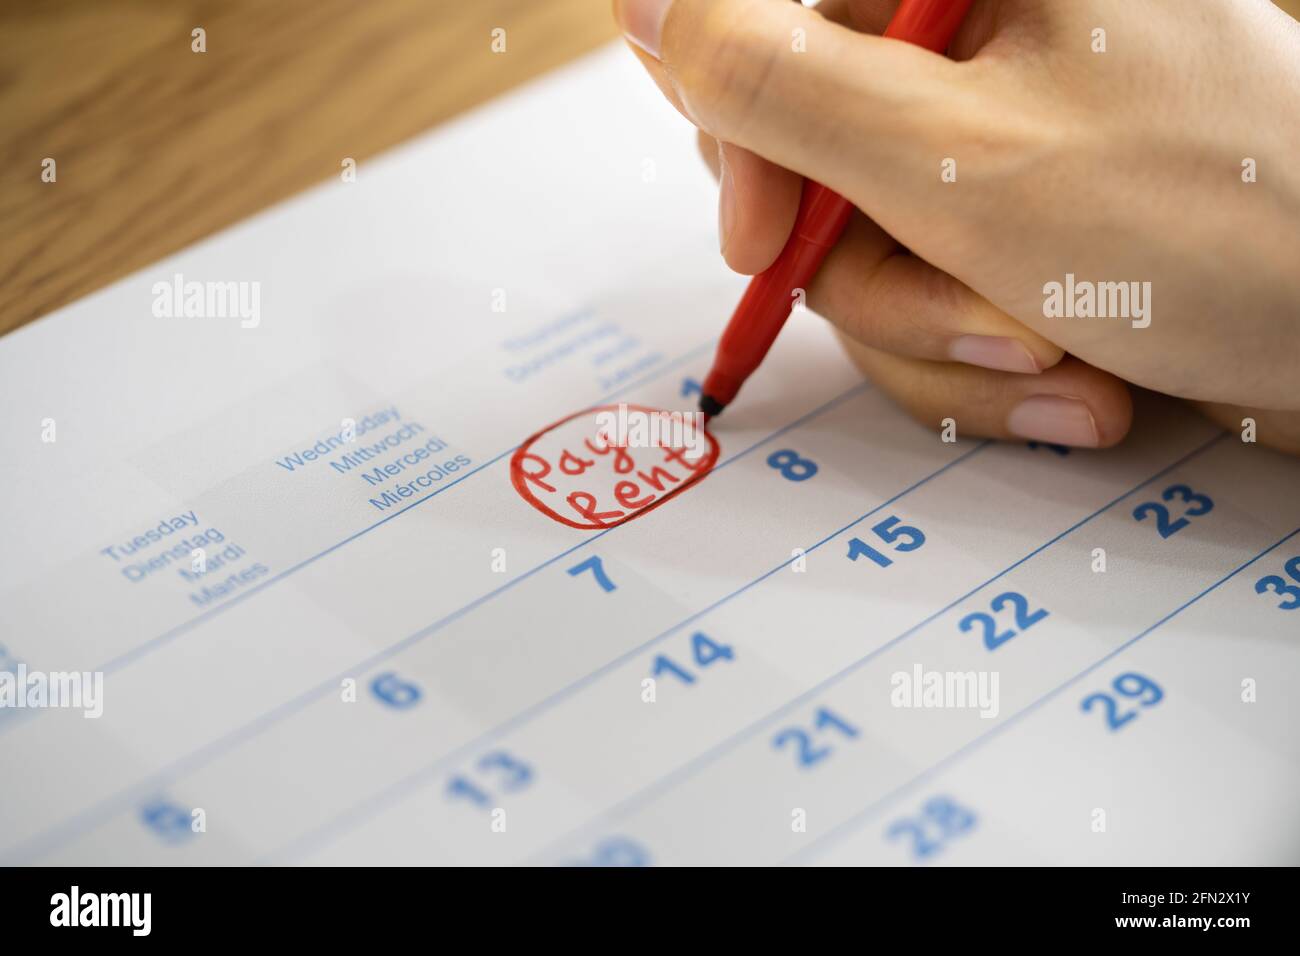 Rent Pay Due Date In Calendar Or Diary Stock Photo